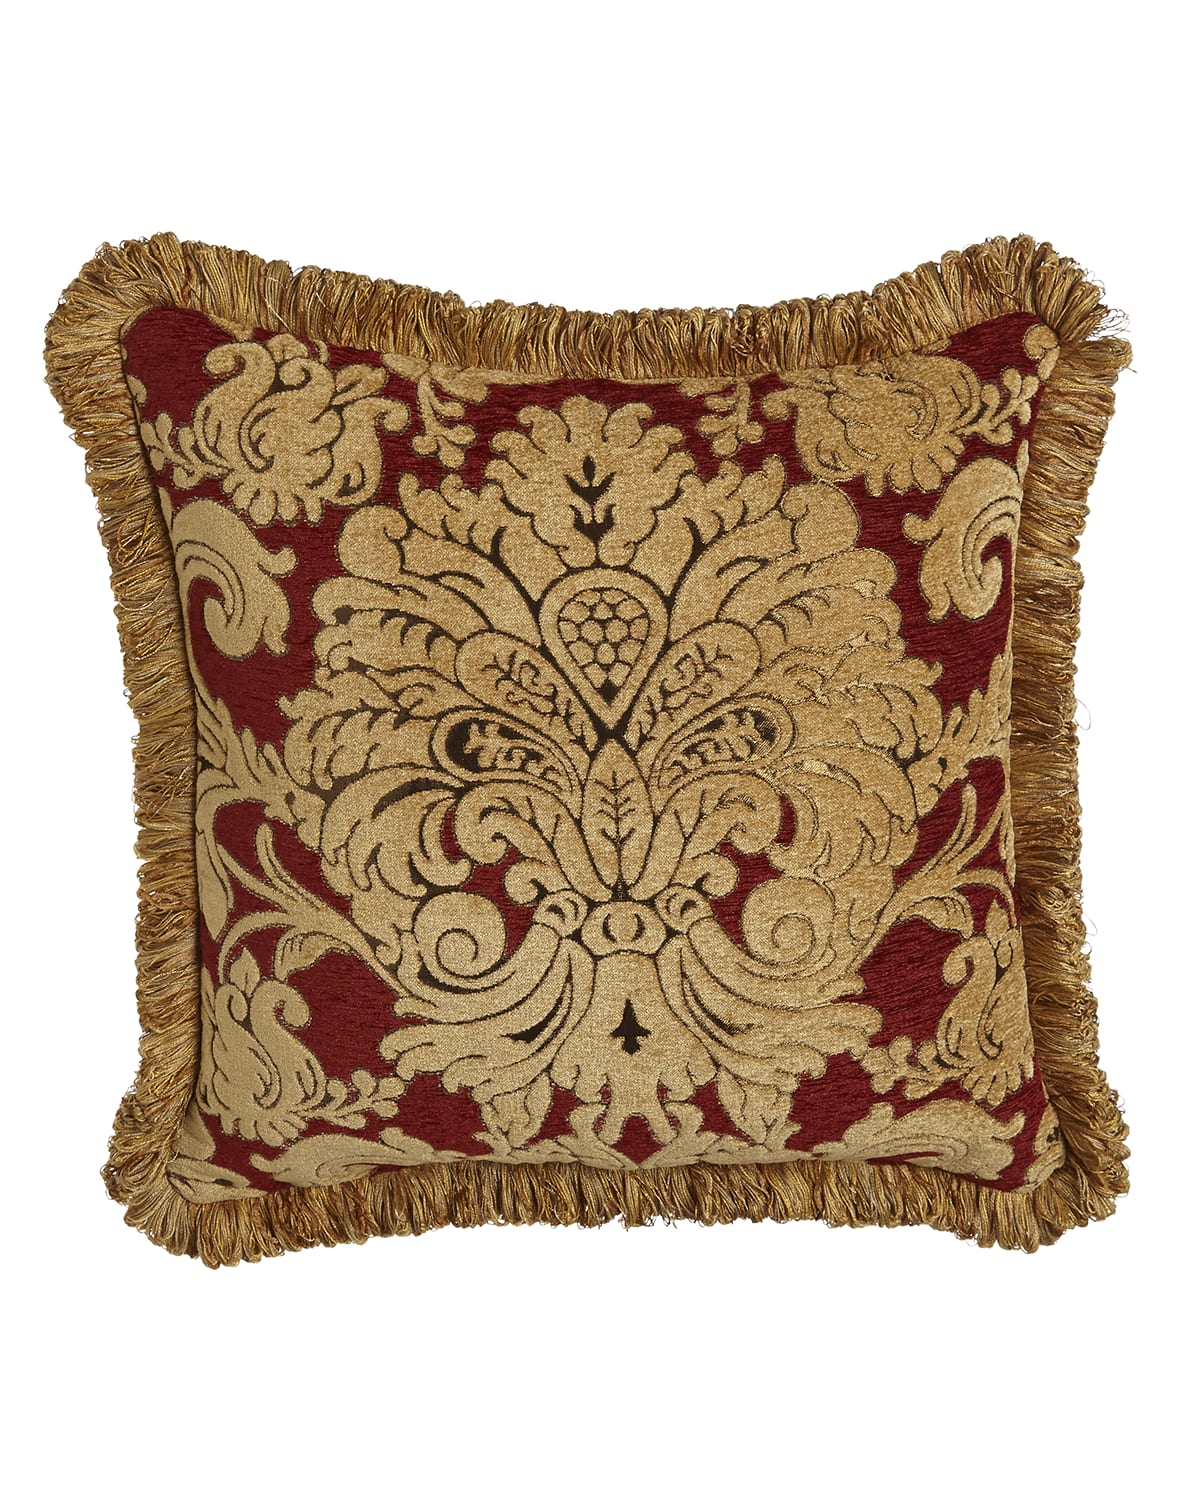 Waterford Gold Annalise Decorative Pillow